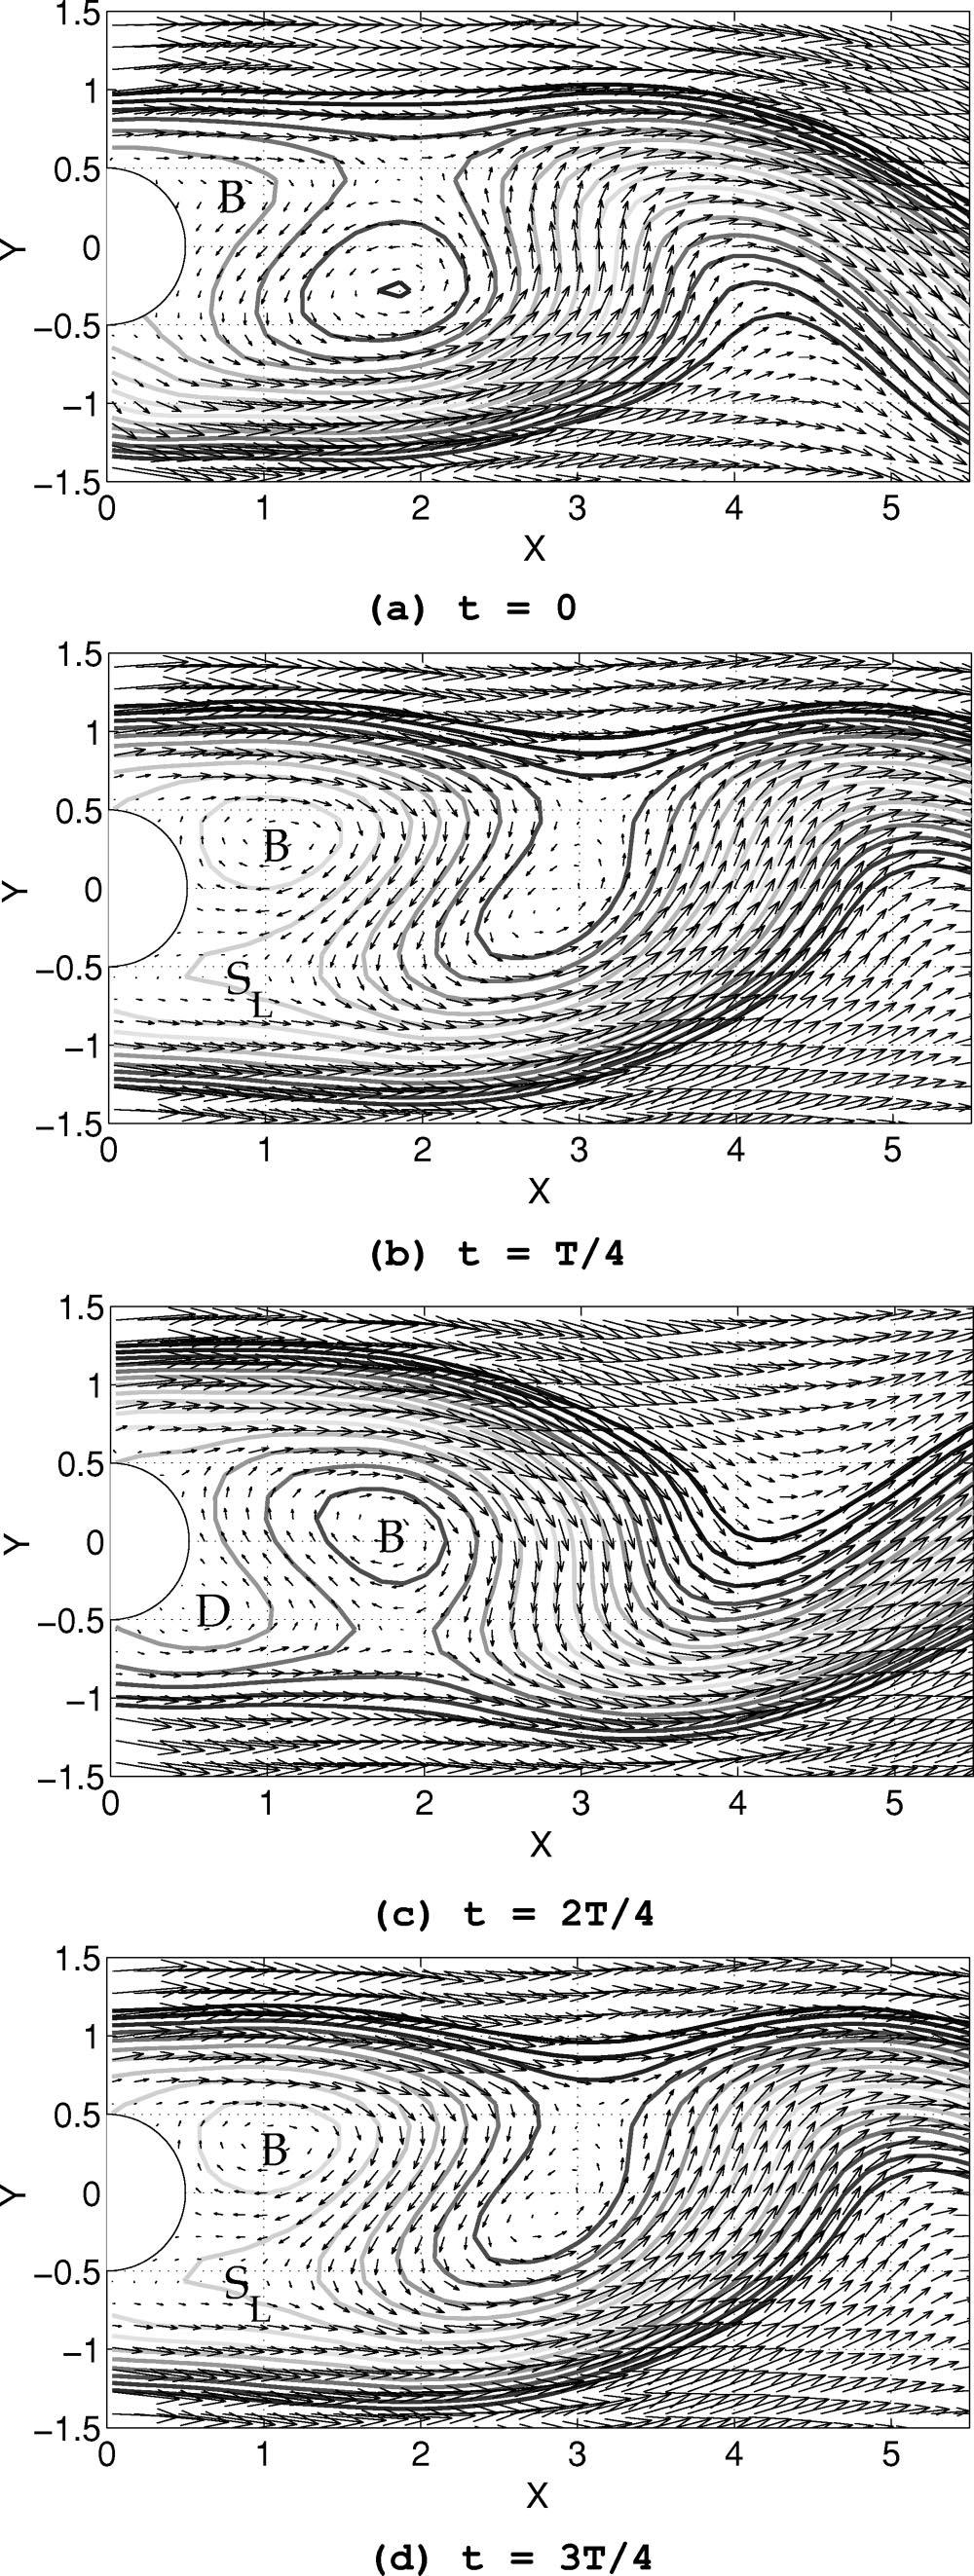 Phys. Fluids, Vol. 16, No. 8, August 2004 Experimental and numerical investigation of the vortex 3109 FIG. 10. Velocity vectors and streamlines at in-plume position for Re 85 and Ri 1.